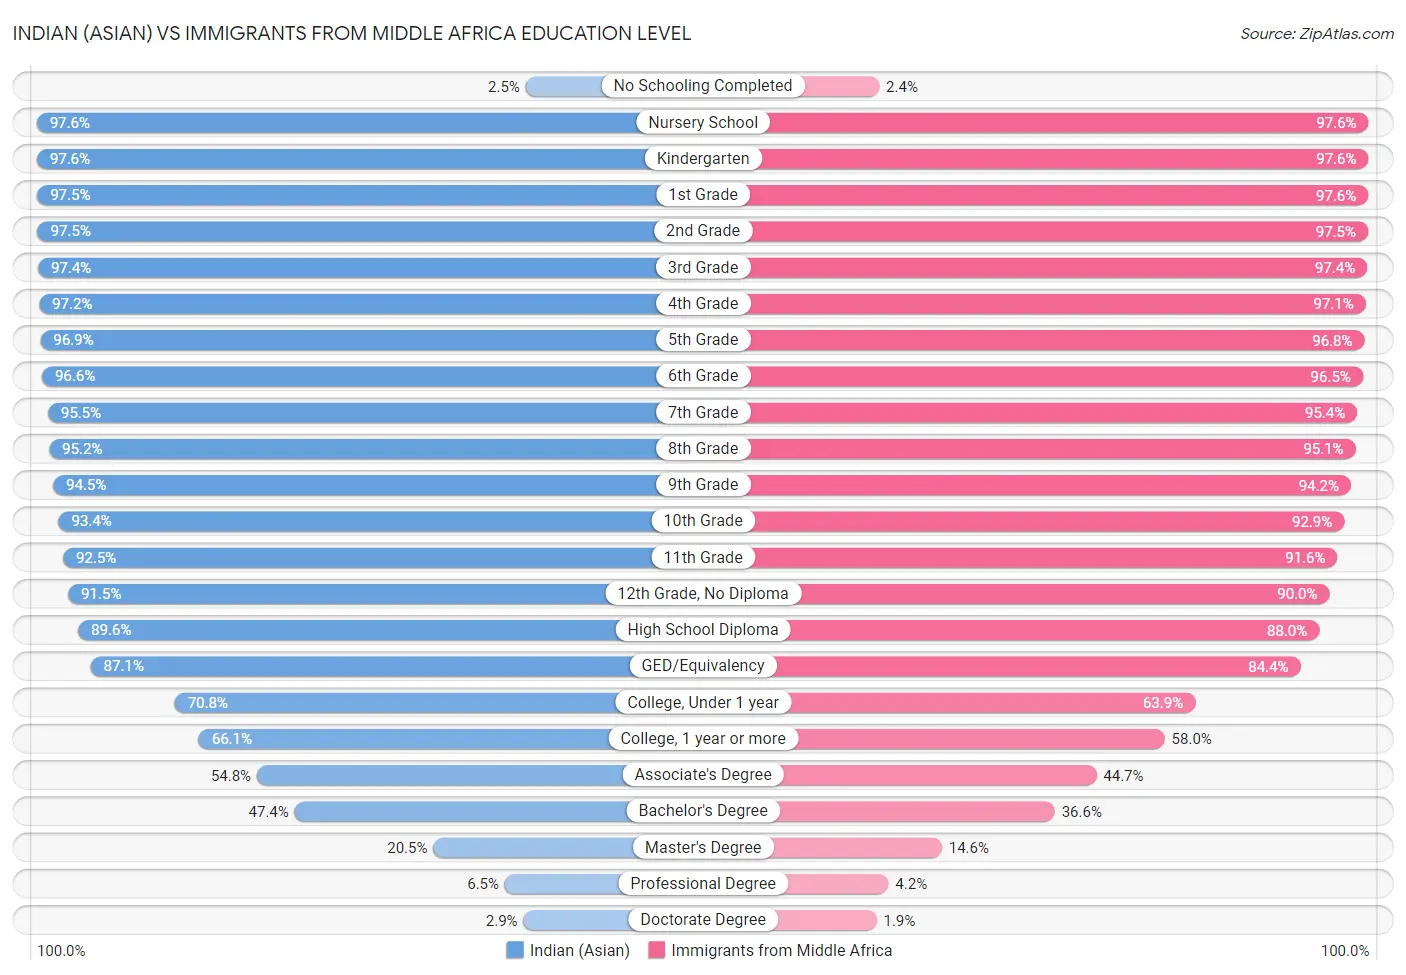 Indian (Asian) vs Immigrants from Middle Africa Education Level